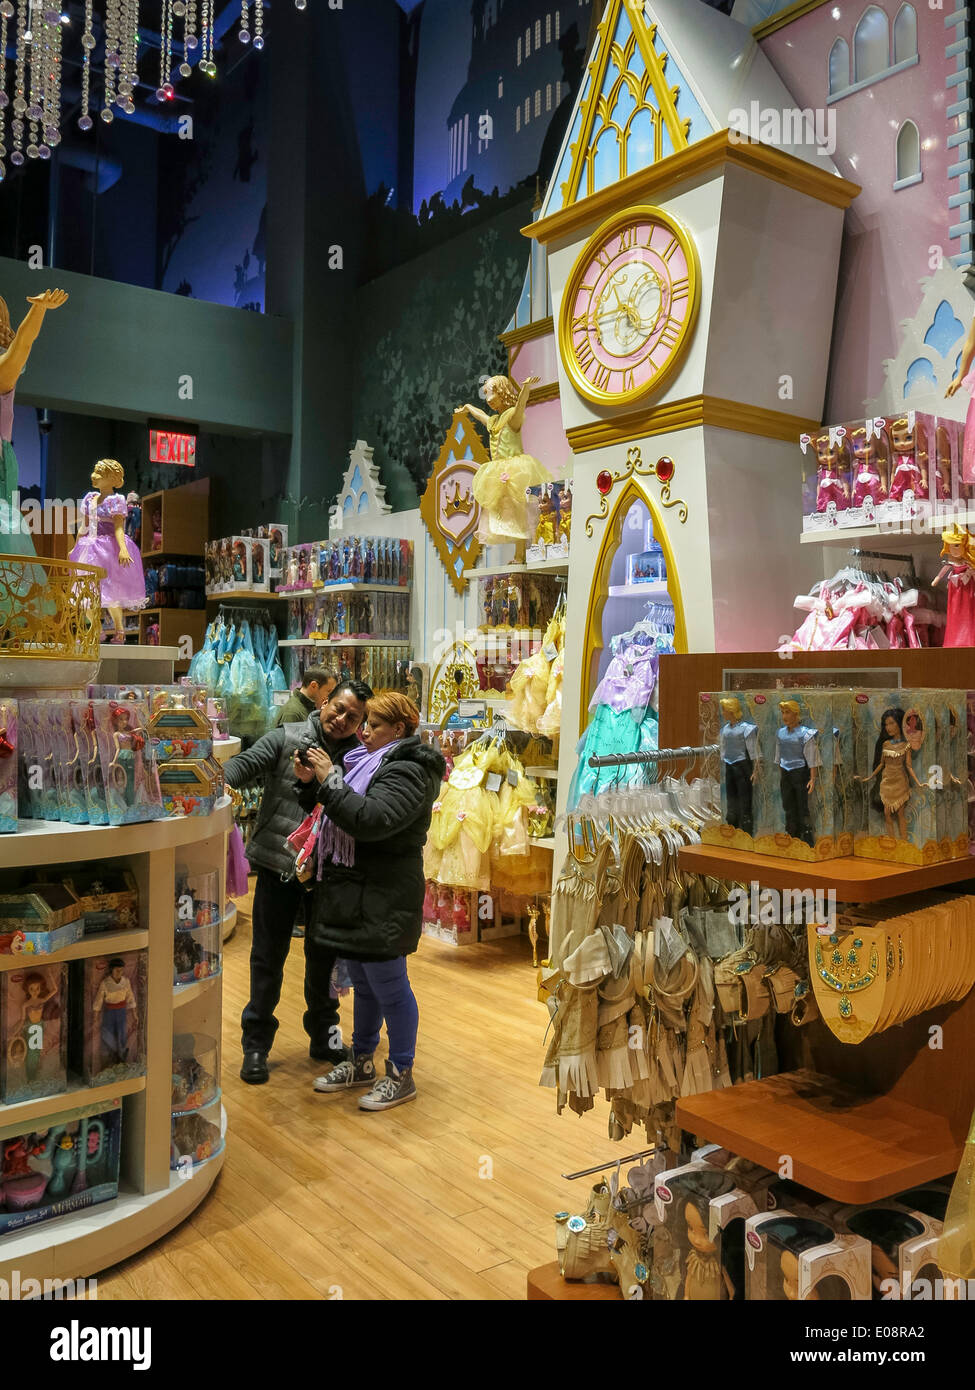 Official Disney Store in Times Square, NYC, USA Stock Photo - Alamy